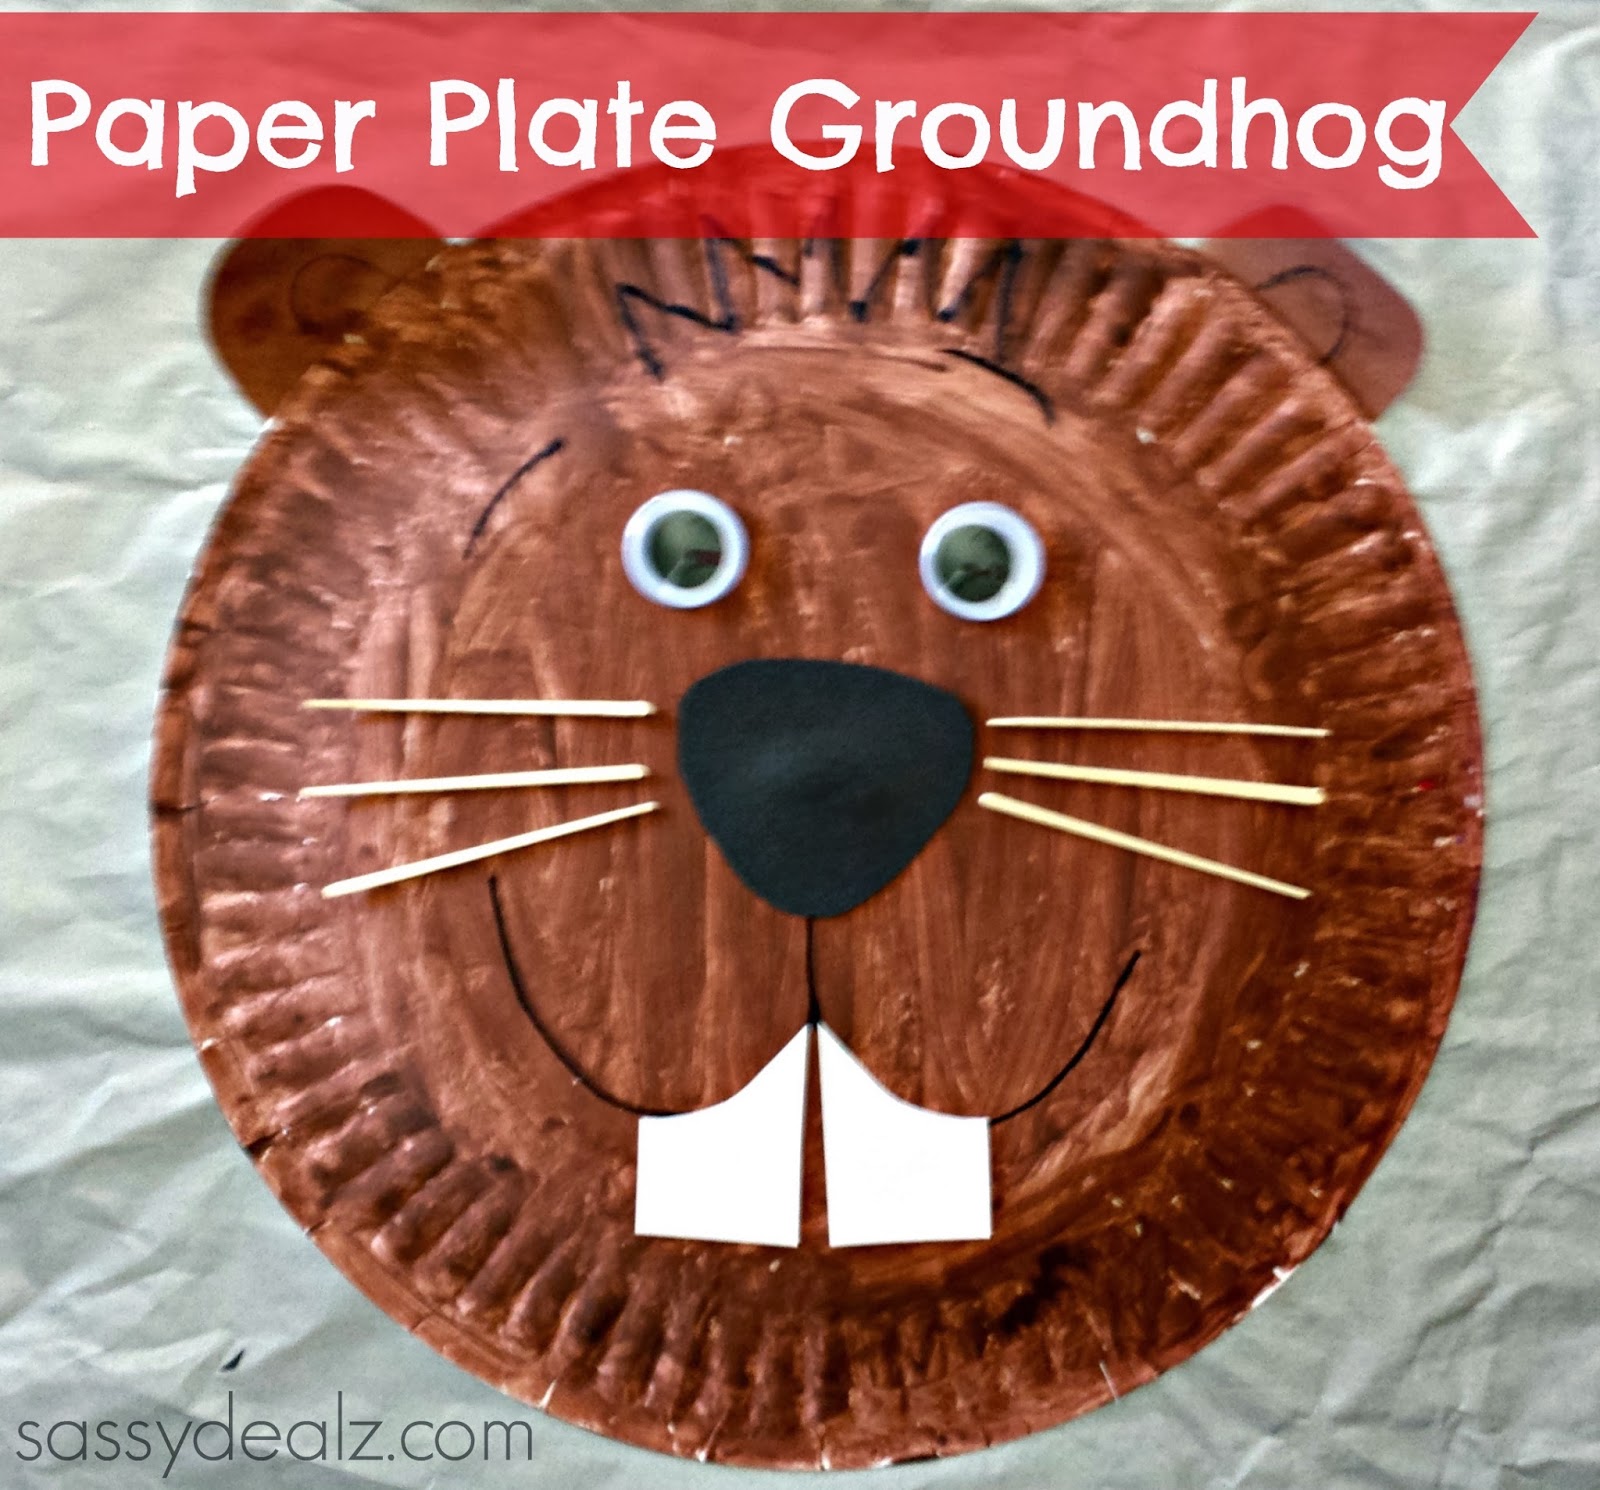 paper plate groundhog day craft